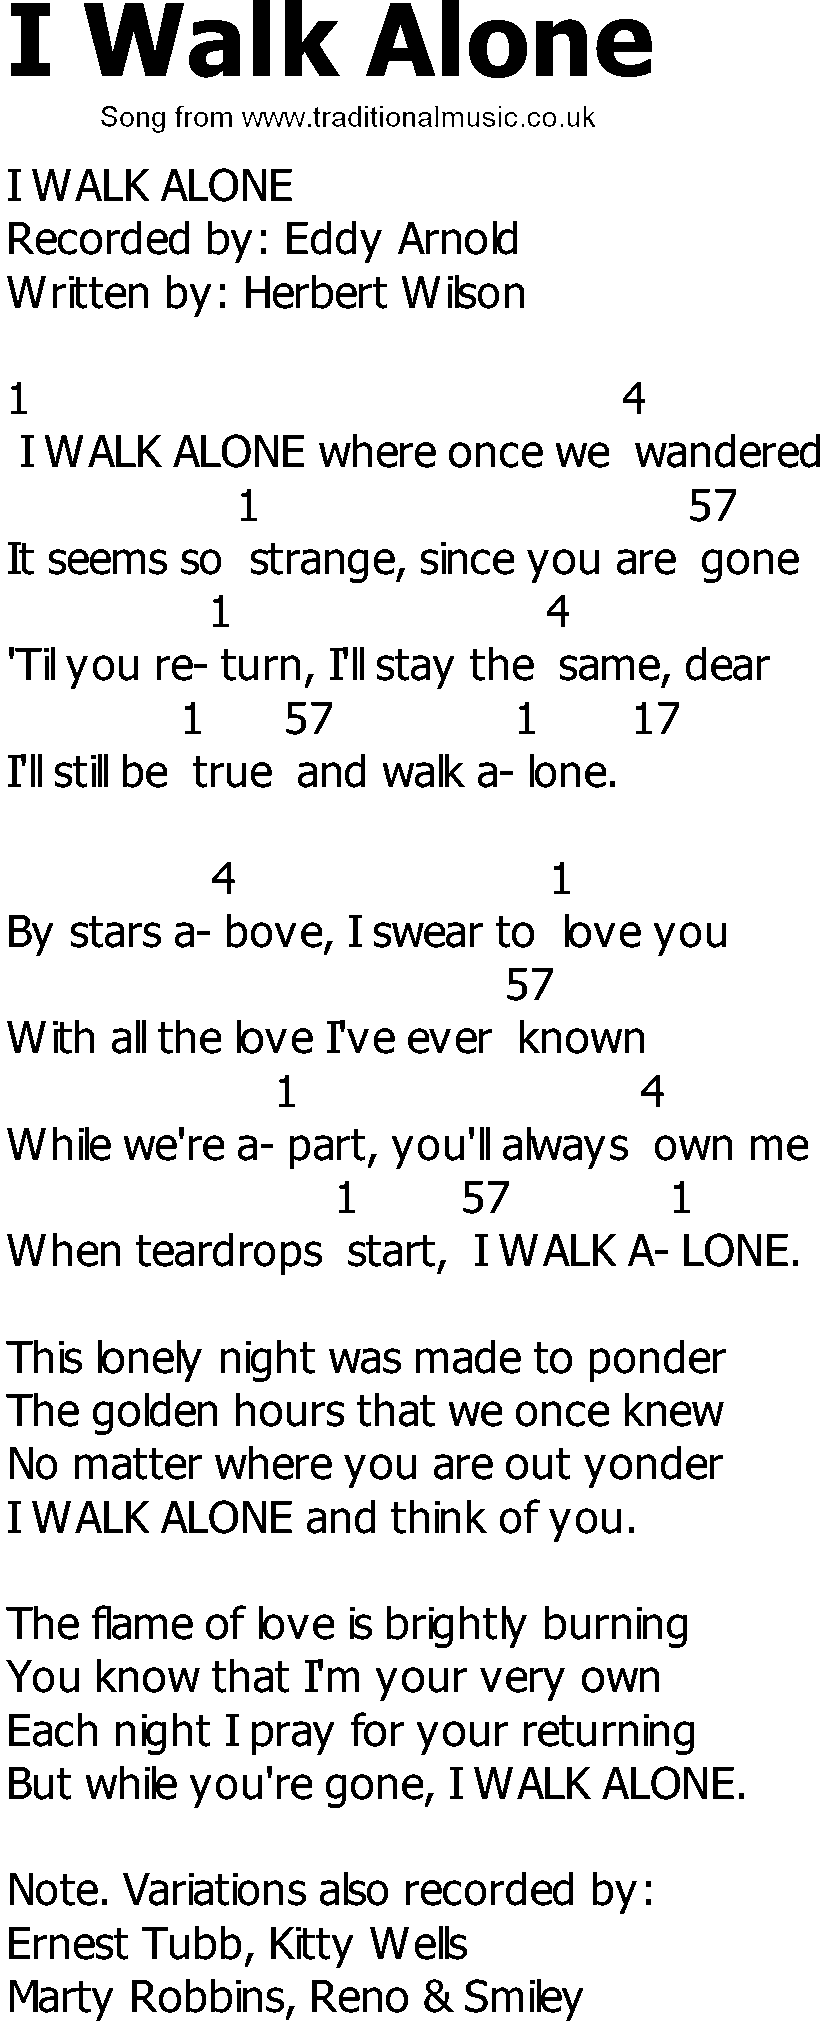 Old Country song lyrics with chords - I Walk Alone